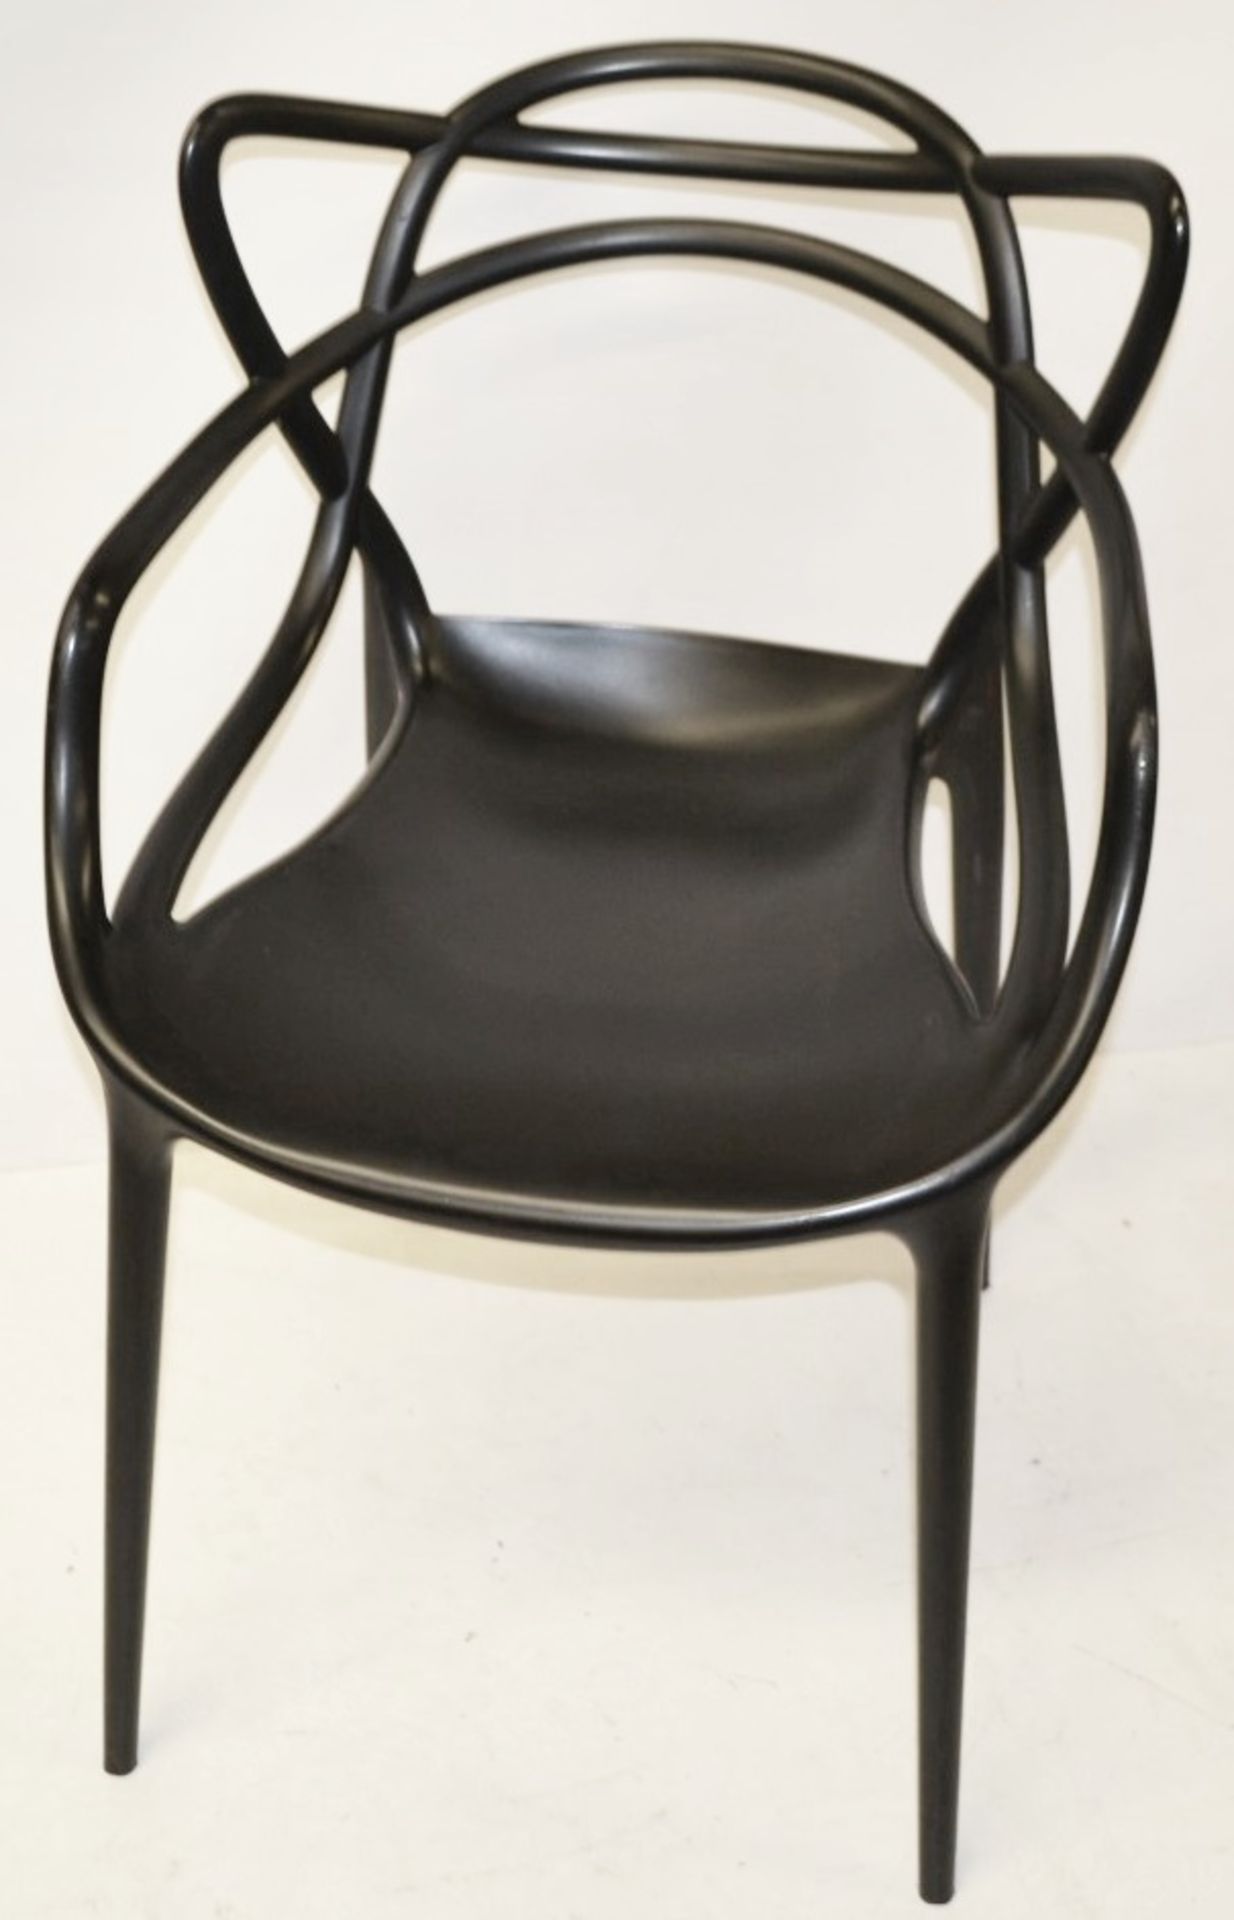 3 x Philippe Starck For Kartell 'Masters' Designer Bistro Chairs In BLACK From A City Centre Cafe